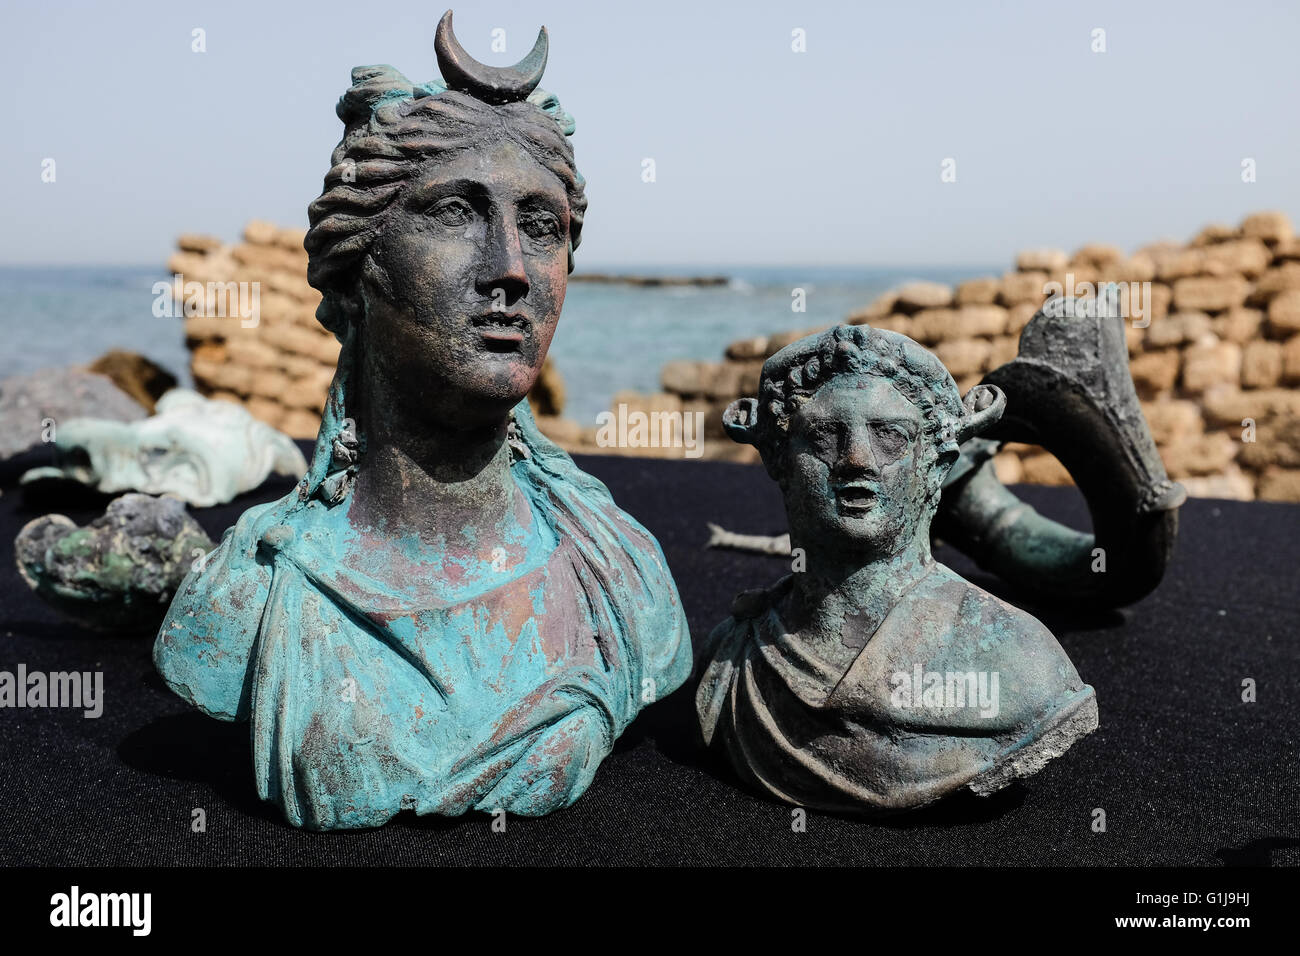 Caesarea, Israel. 16th May, 2016. Figurines of the moon goddess Luna (left) and Dionysus (right), the god of wine. An underwater salvage survey conducted in recent weeks at the ancient Caesarea Harbor by divers from the Israel Antiquities Authority has led to the exposure of a “large, spectacular and beautiful, ancient marine cargo” of a merchant ship that sank during the Late Roman period. Credit:  Nir Alon/Alamy Live News Stock Photo